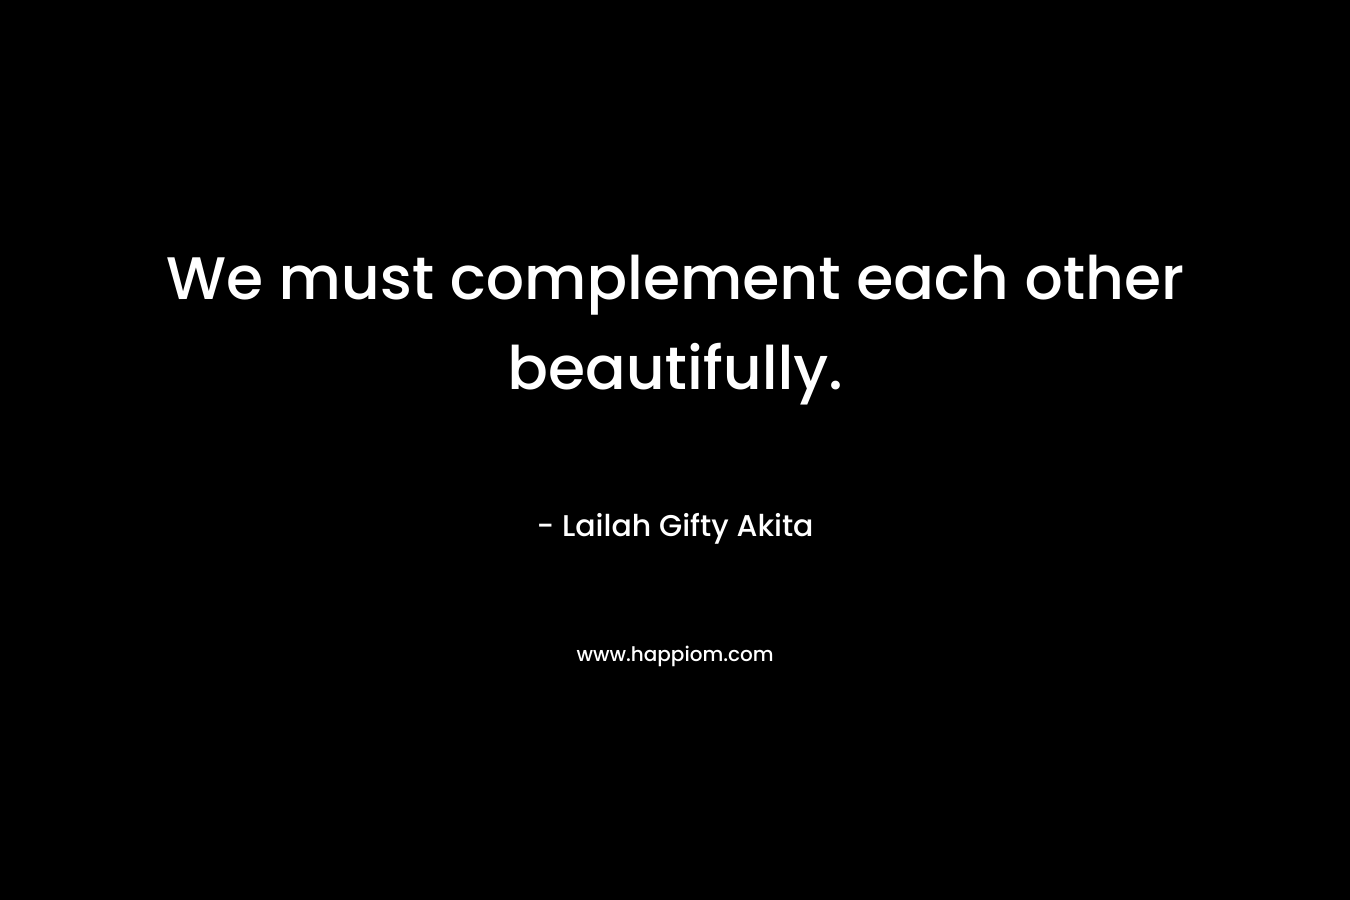 We must complement each other beautifully. – Lailah Gifty Akita